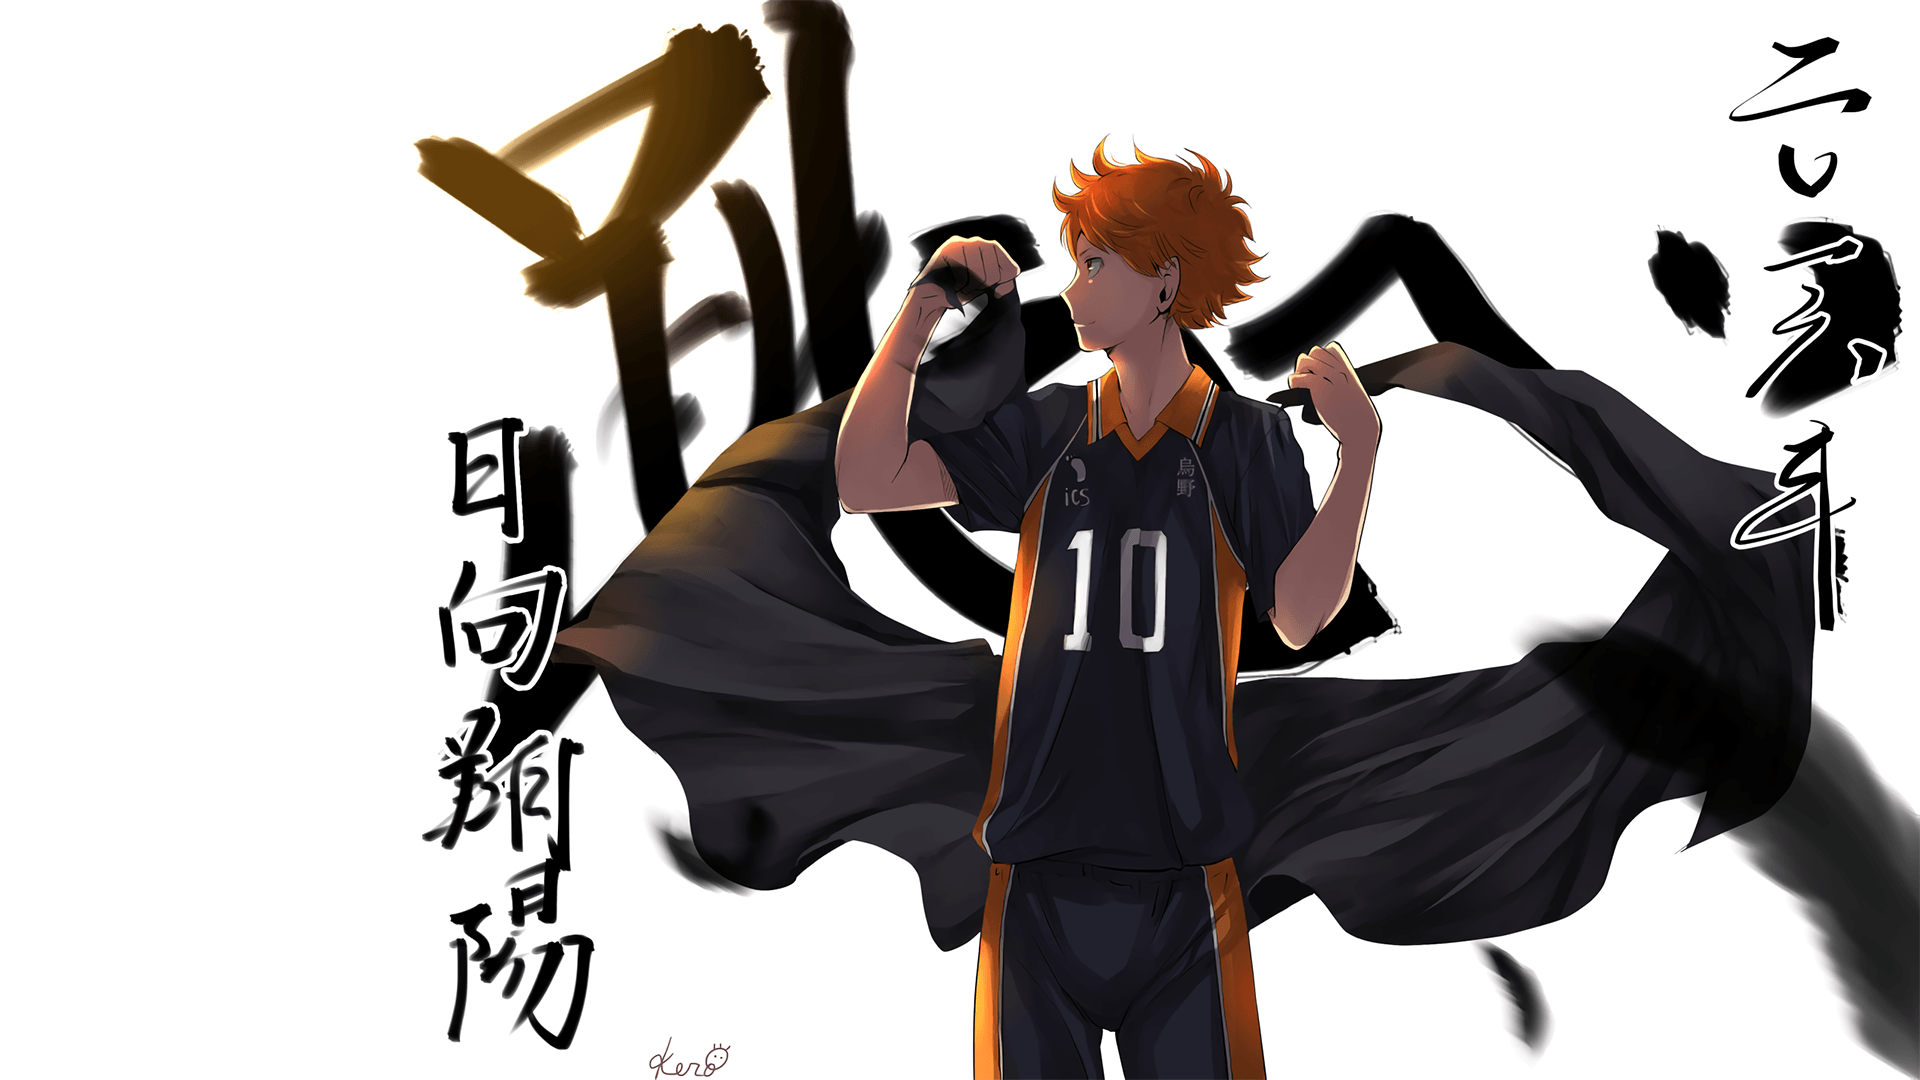 Haikyuu wallpaper ·① Download free cool High Resolution wallpapers for  desktop, mobile, laptop in any resolution: desk… | Haikyuu wallpaper,  Haikyu!!, Haikyuu anime